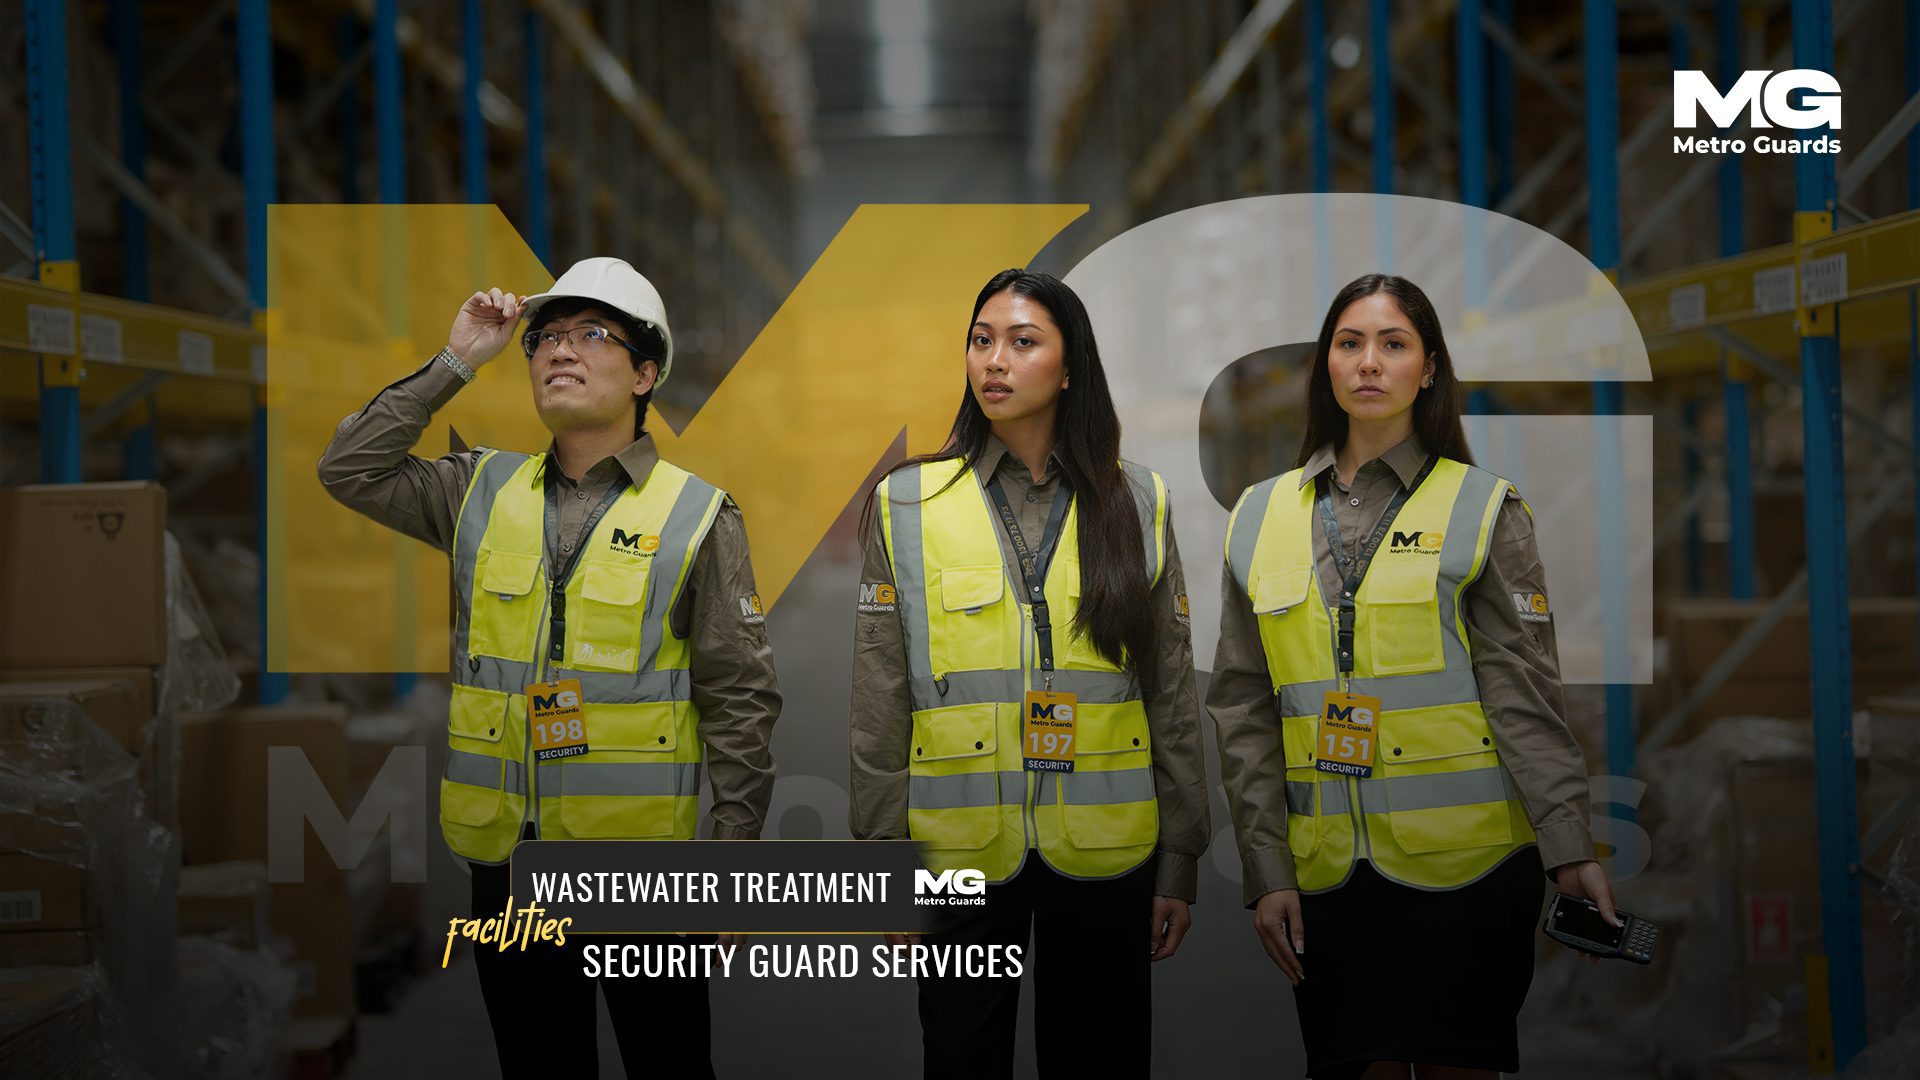 Wastewater treatment facilities security guard Services